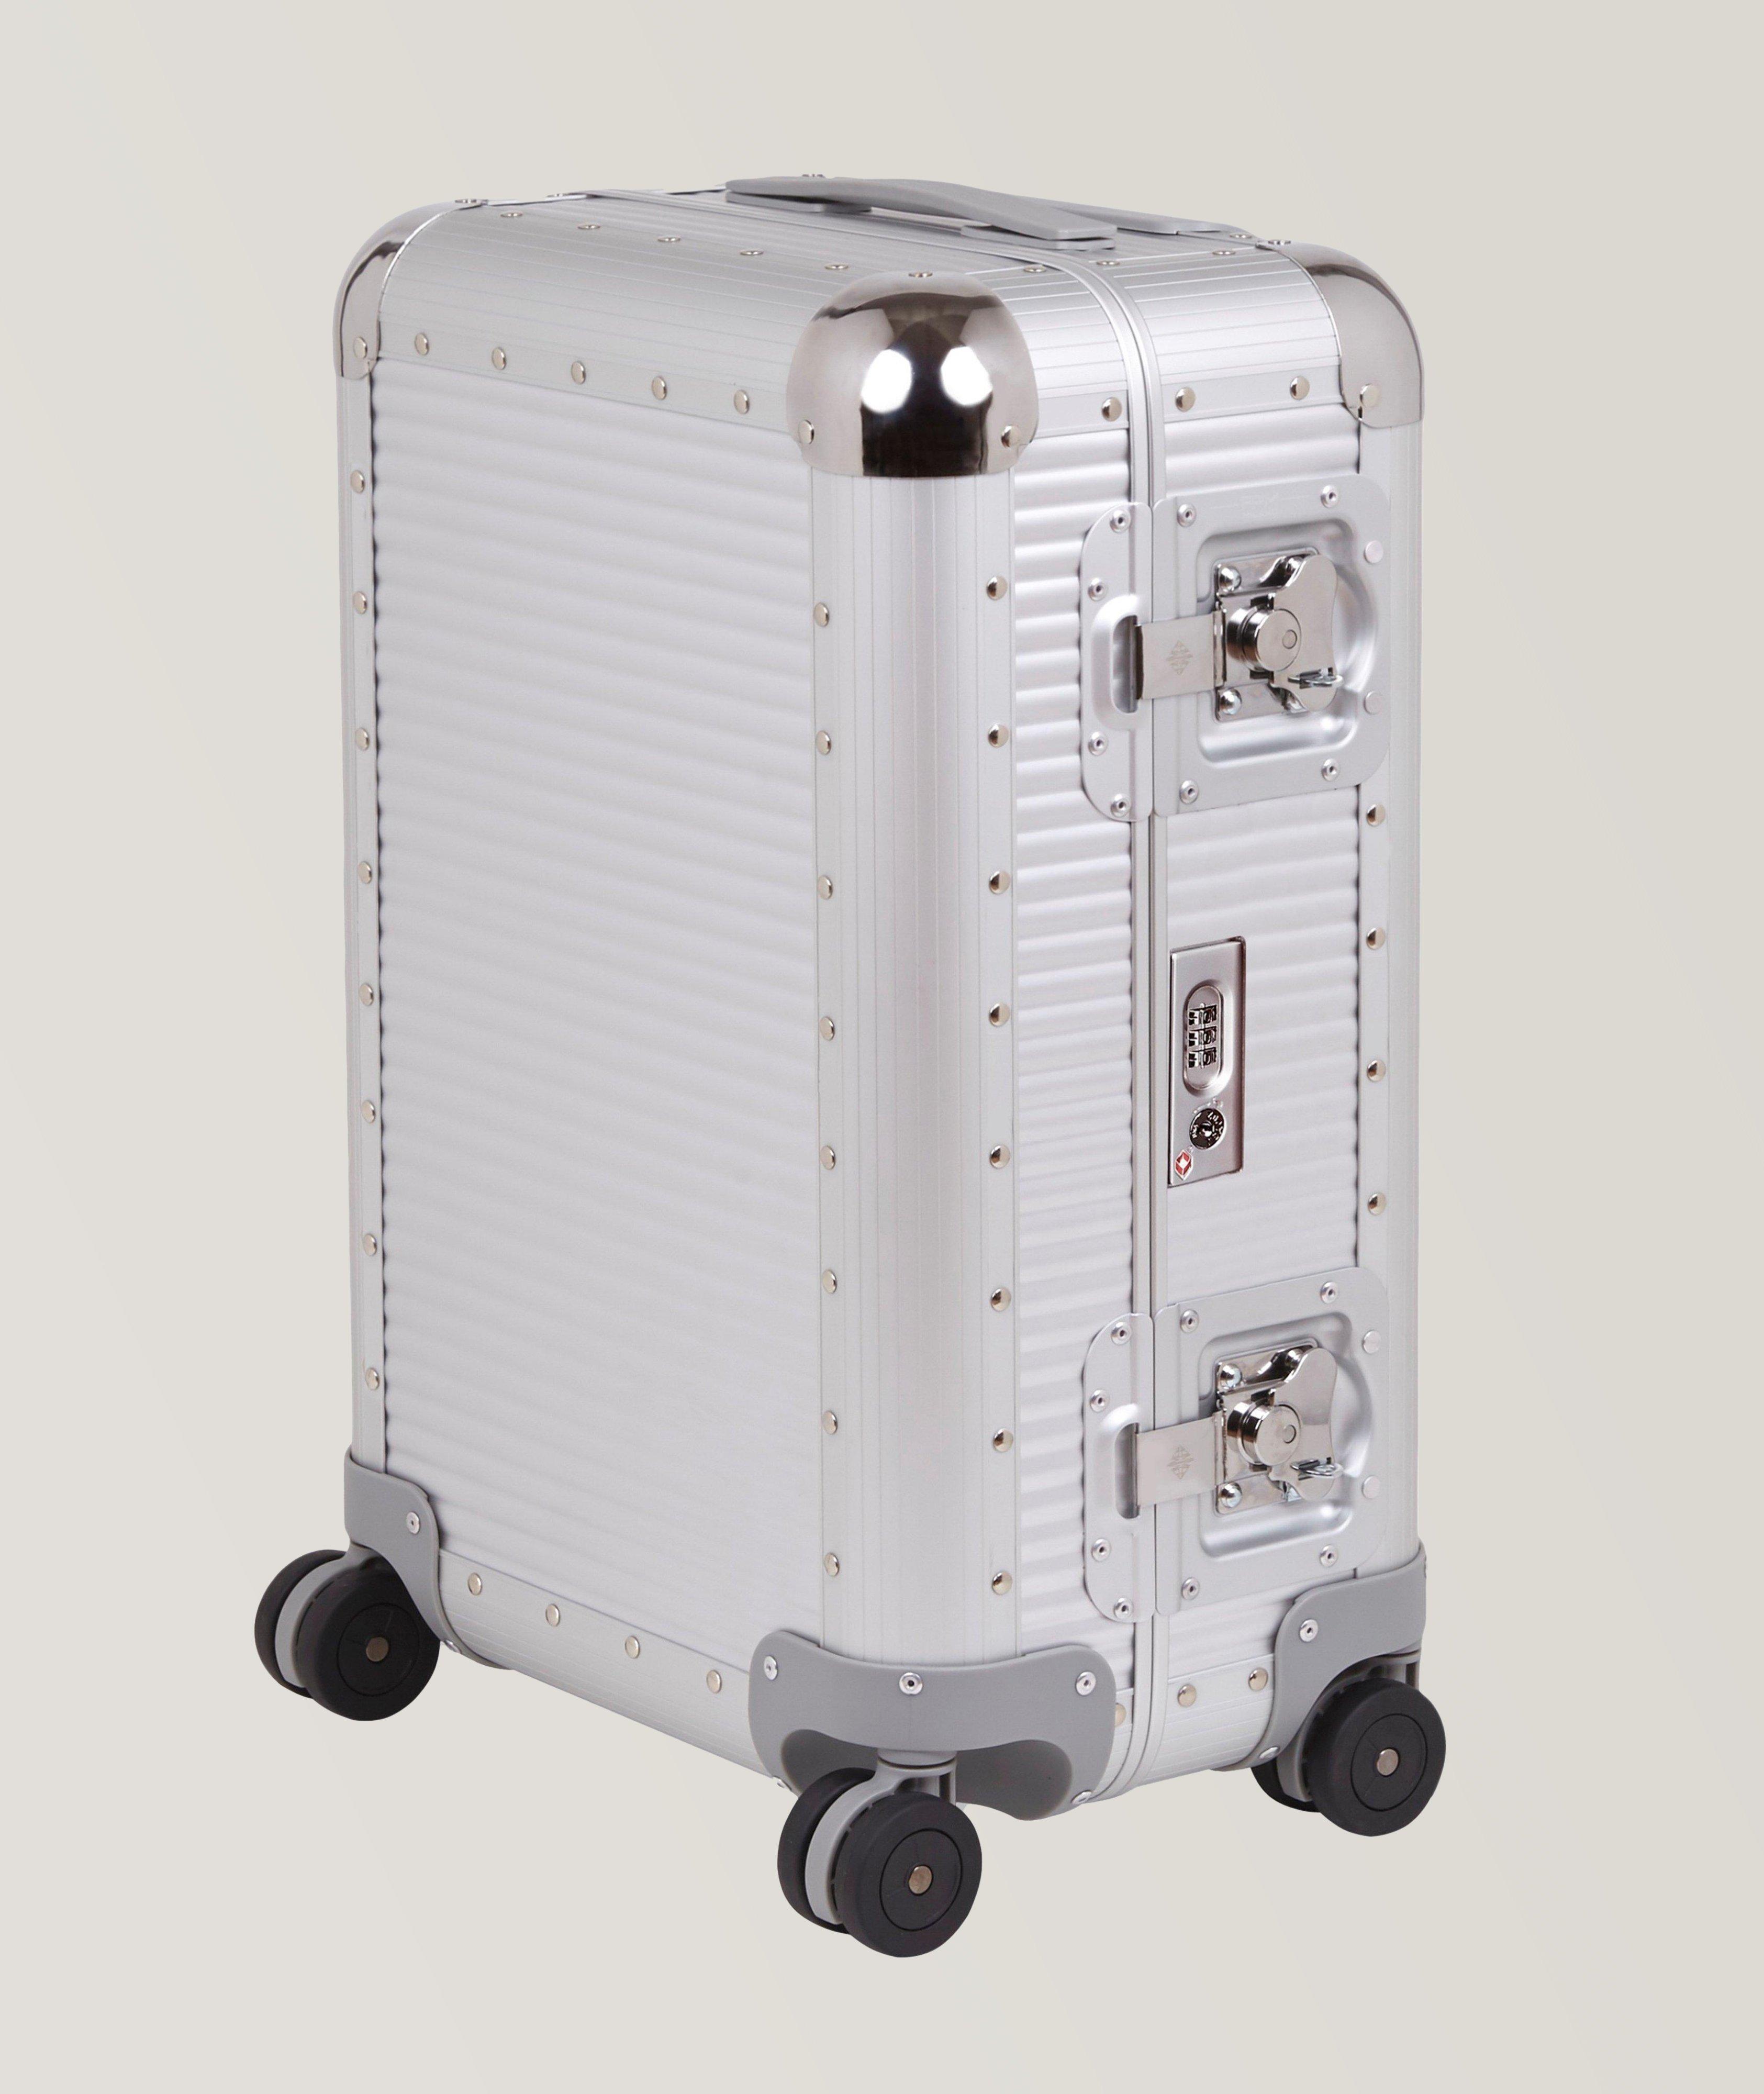 Bank S Spinner 55cm Aluminium Carry-on Luggage image 1